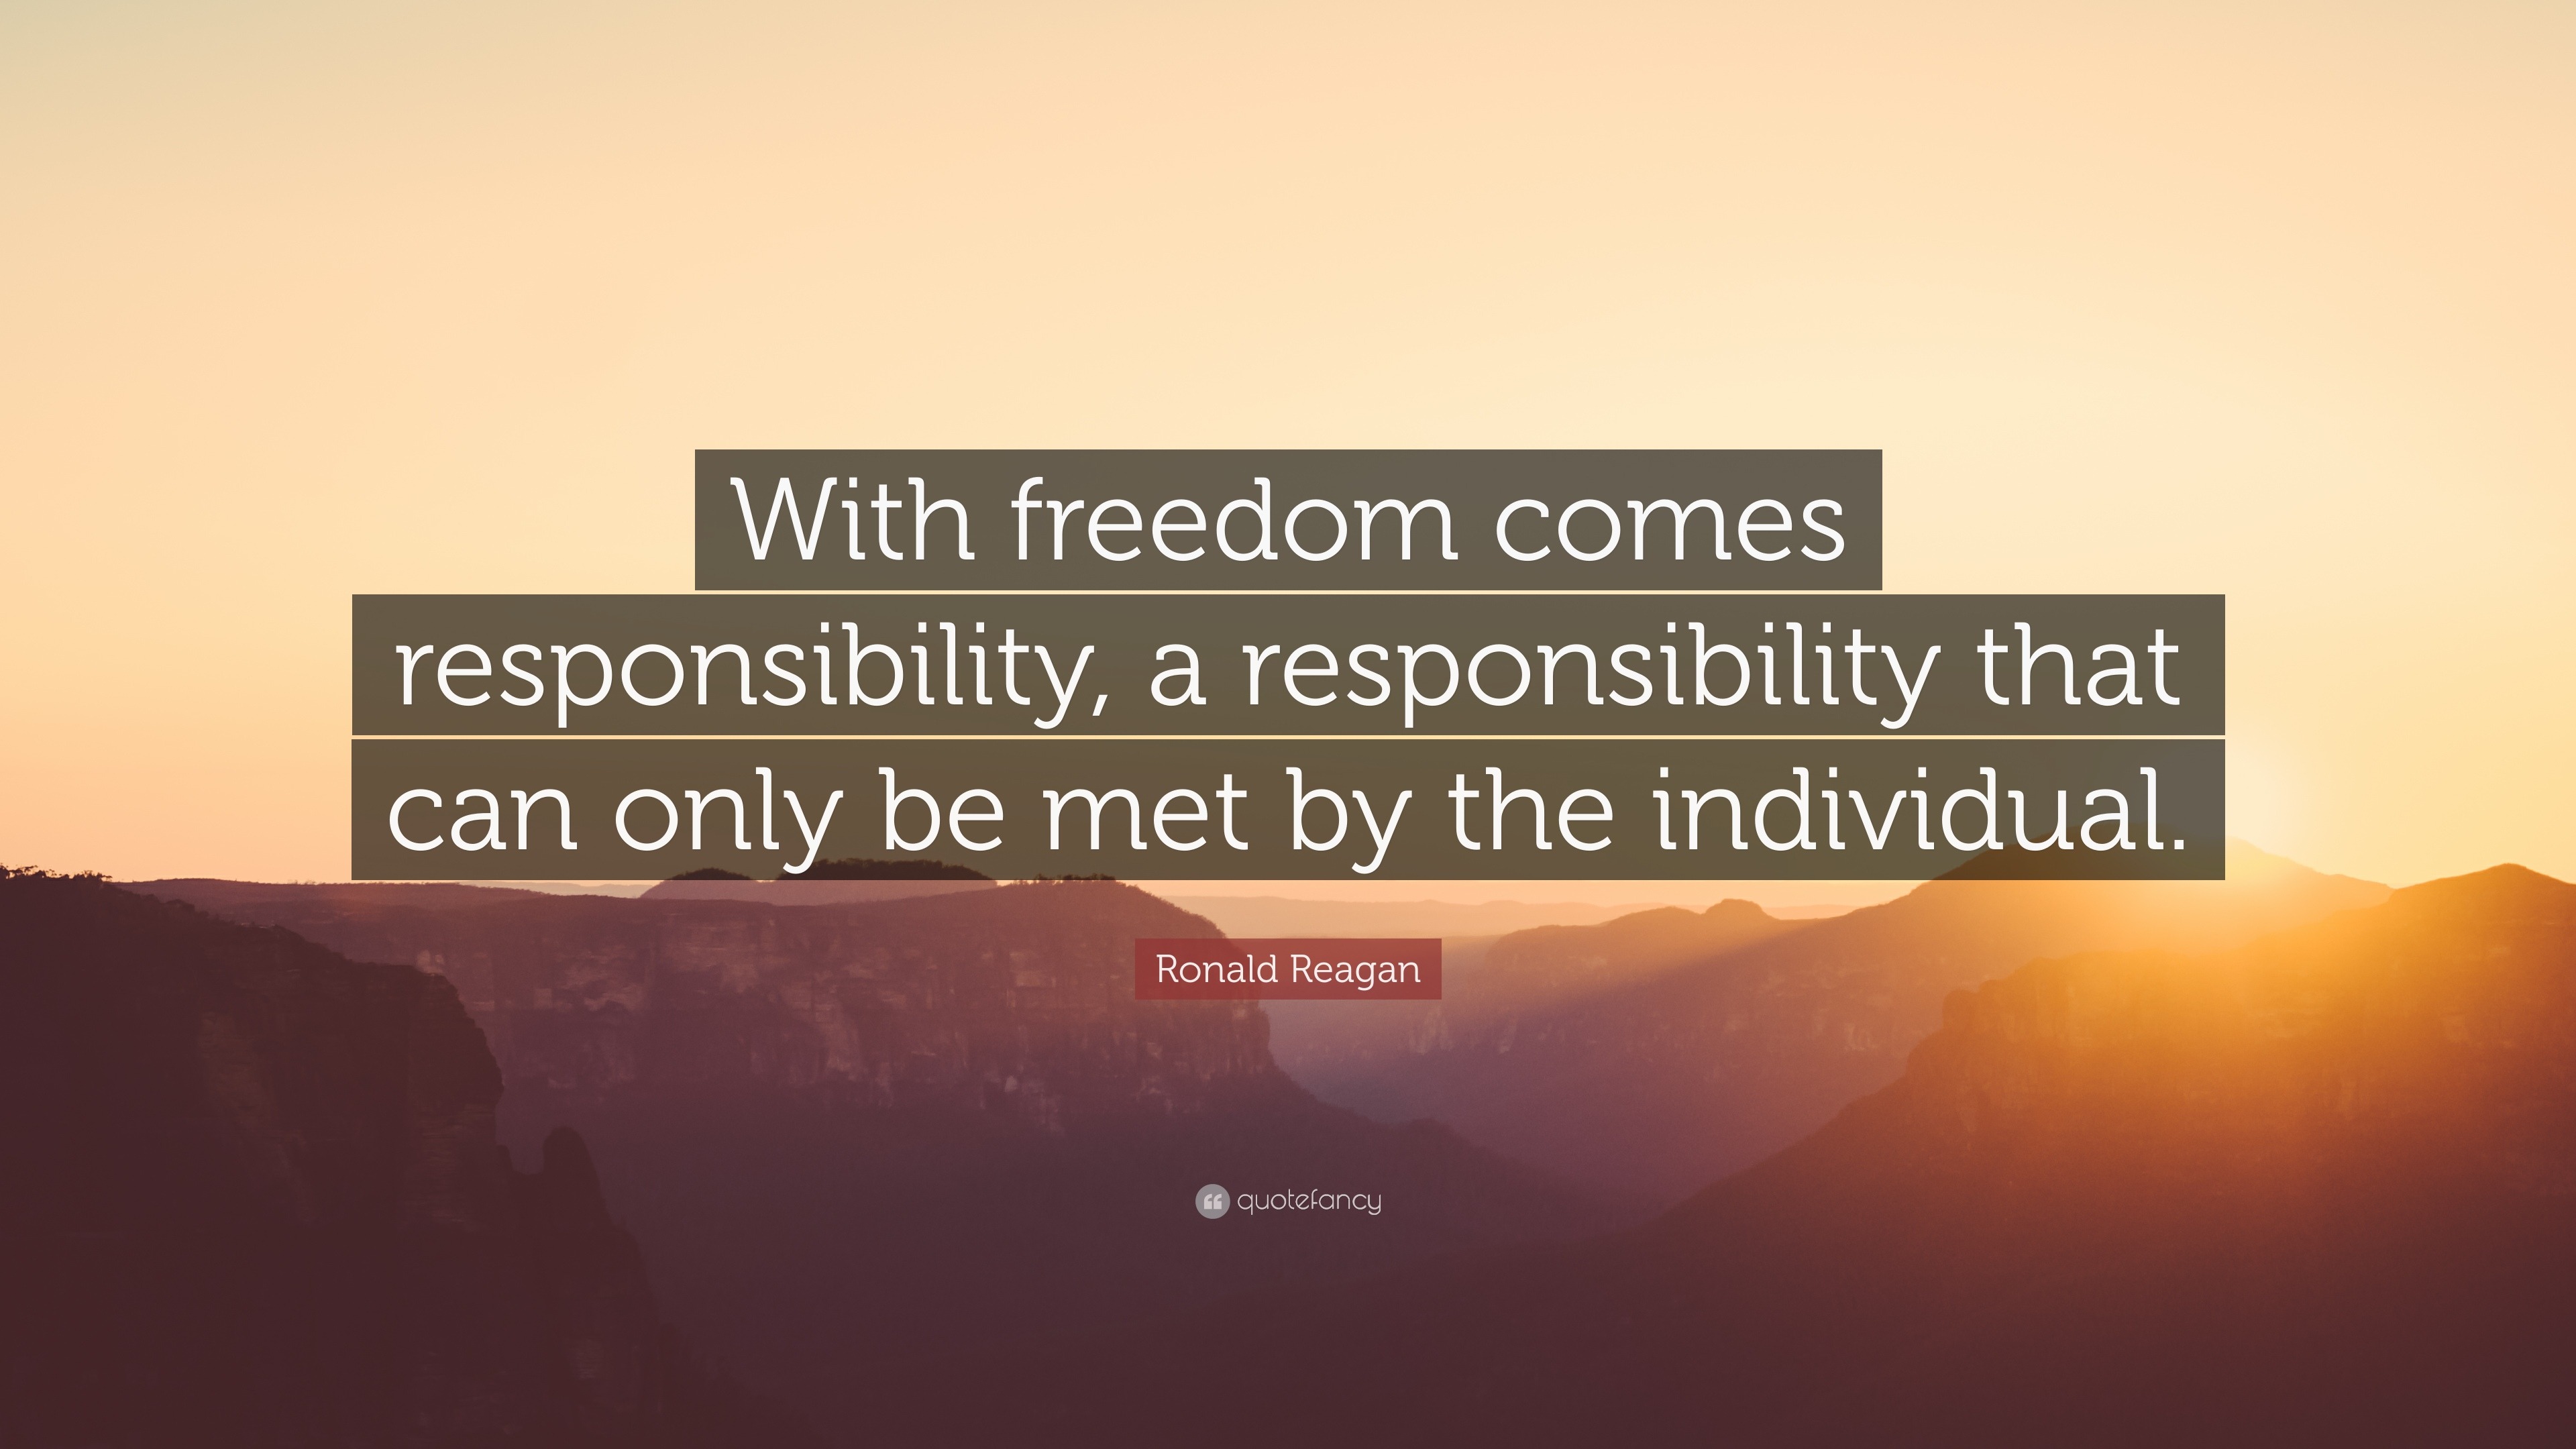 Ronald Reagan Quote “With freedom comes responsibility, a